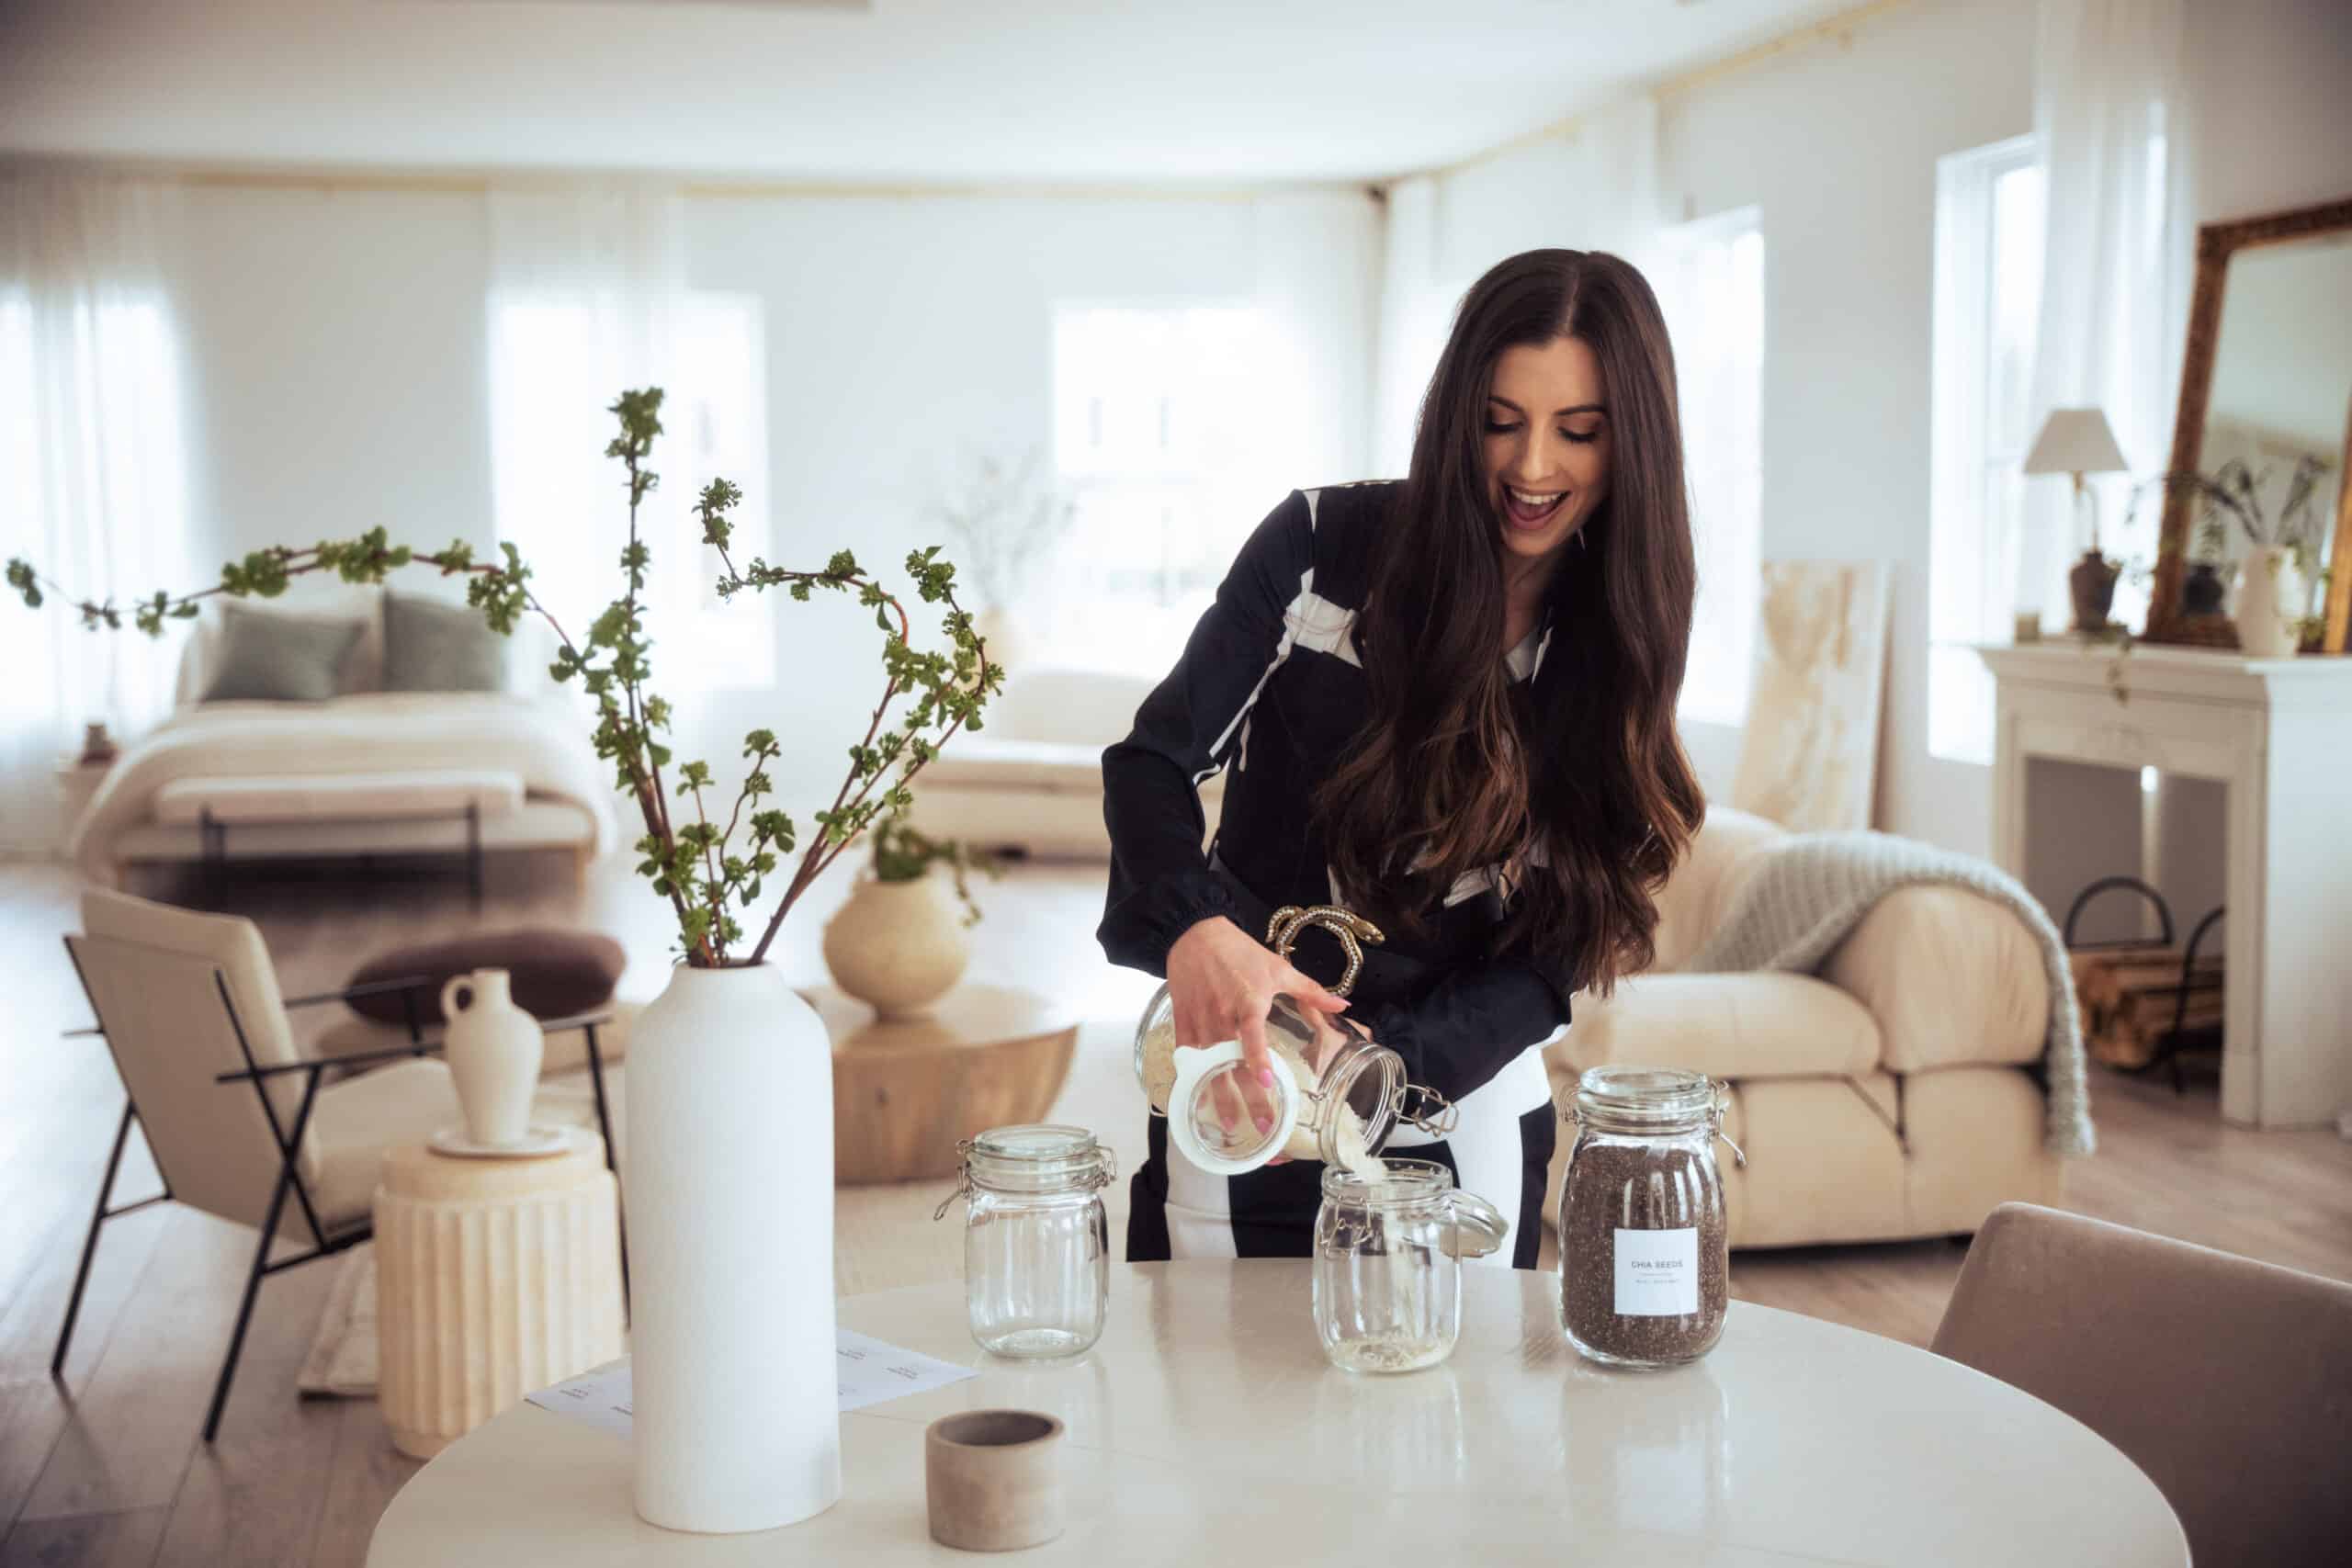 Caitlin Ruth V professional organizer, Interior Designer and business owner demonstrating decanting rice into a jar in a beautifully organized home